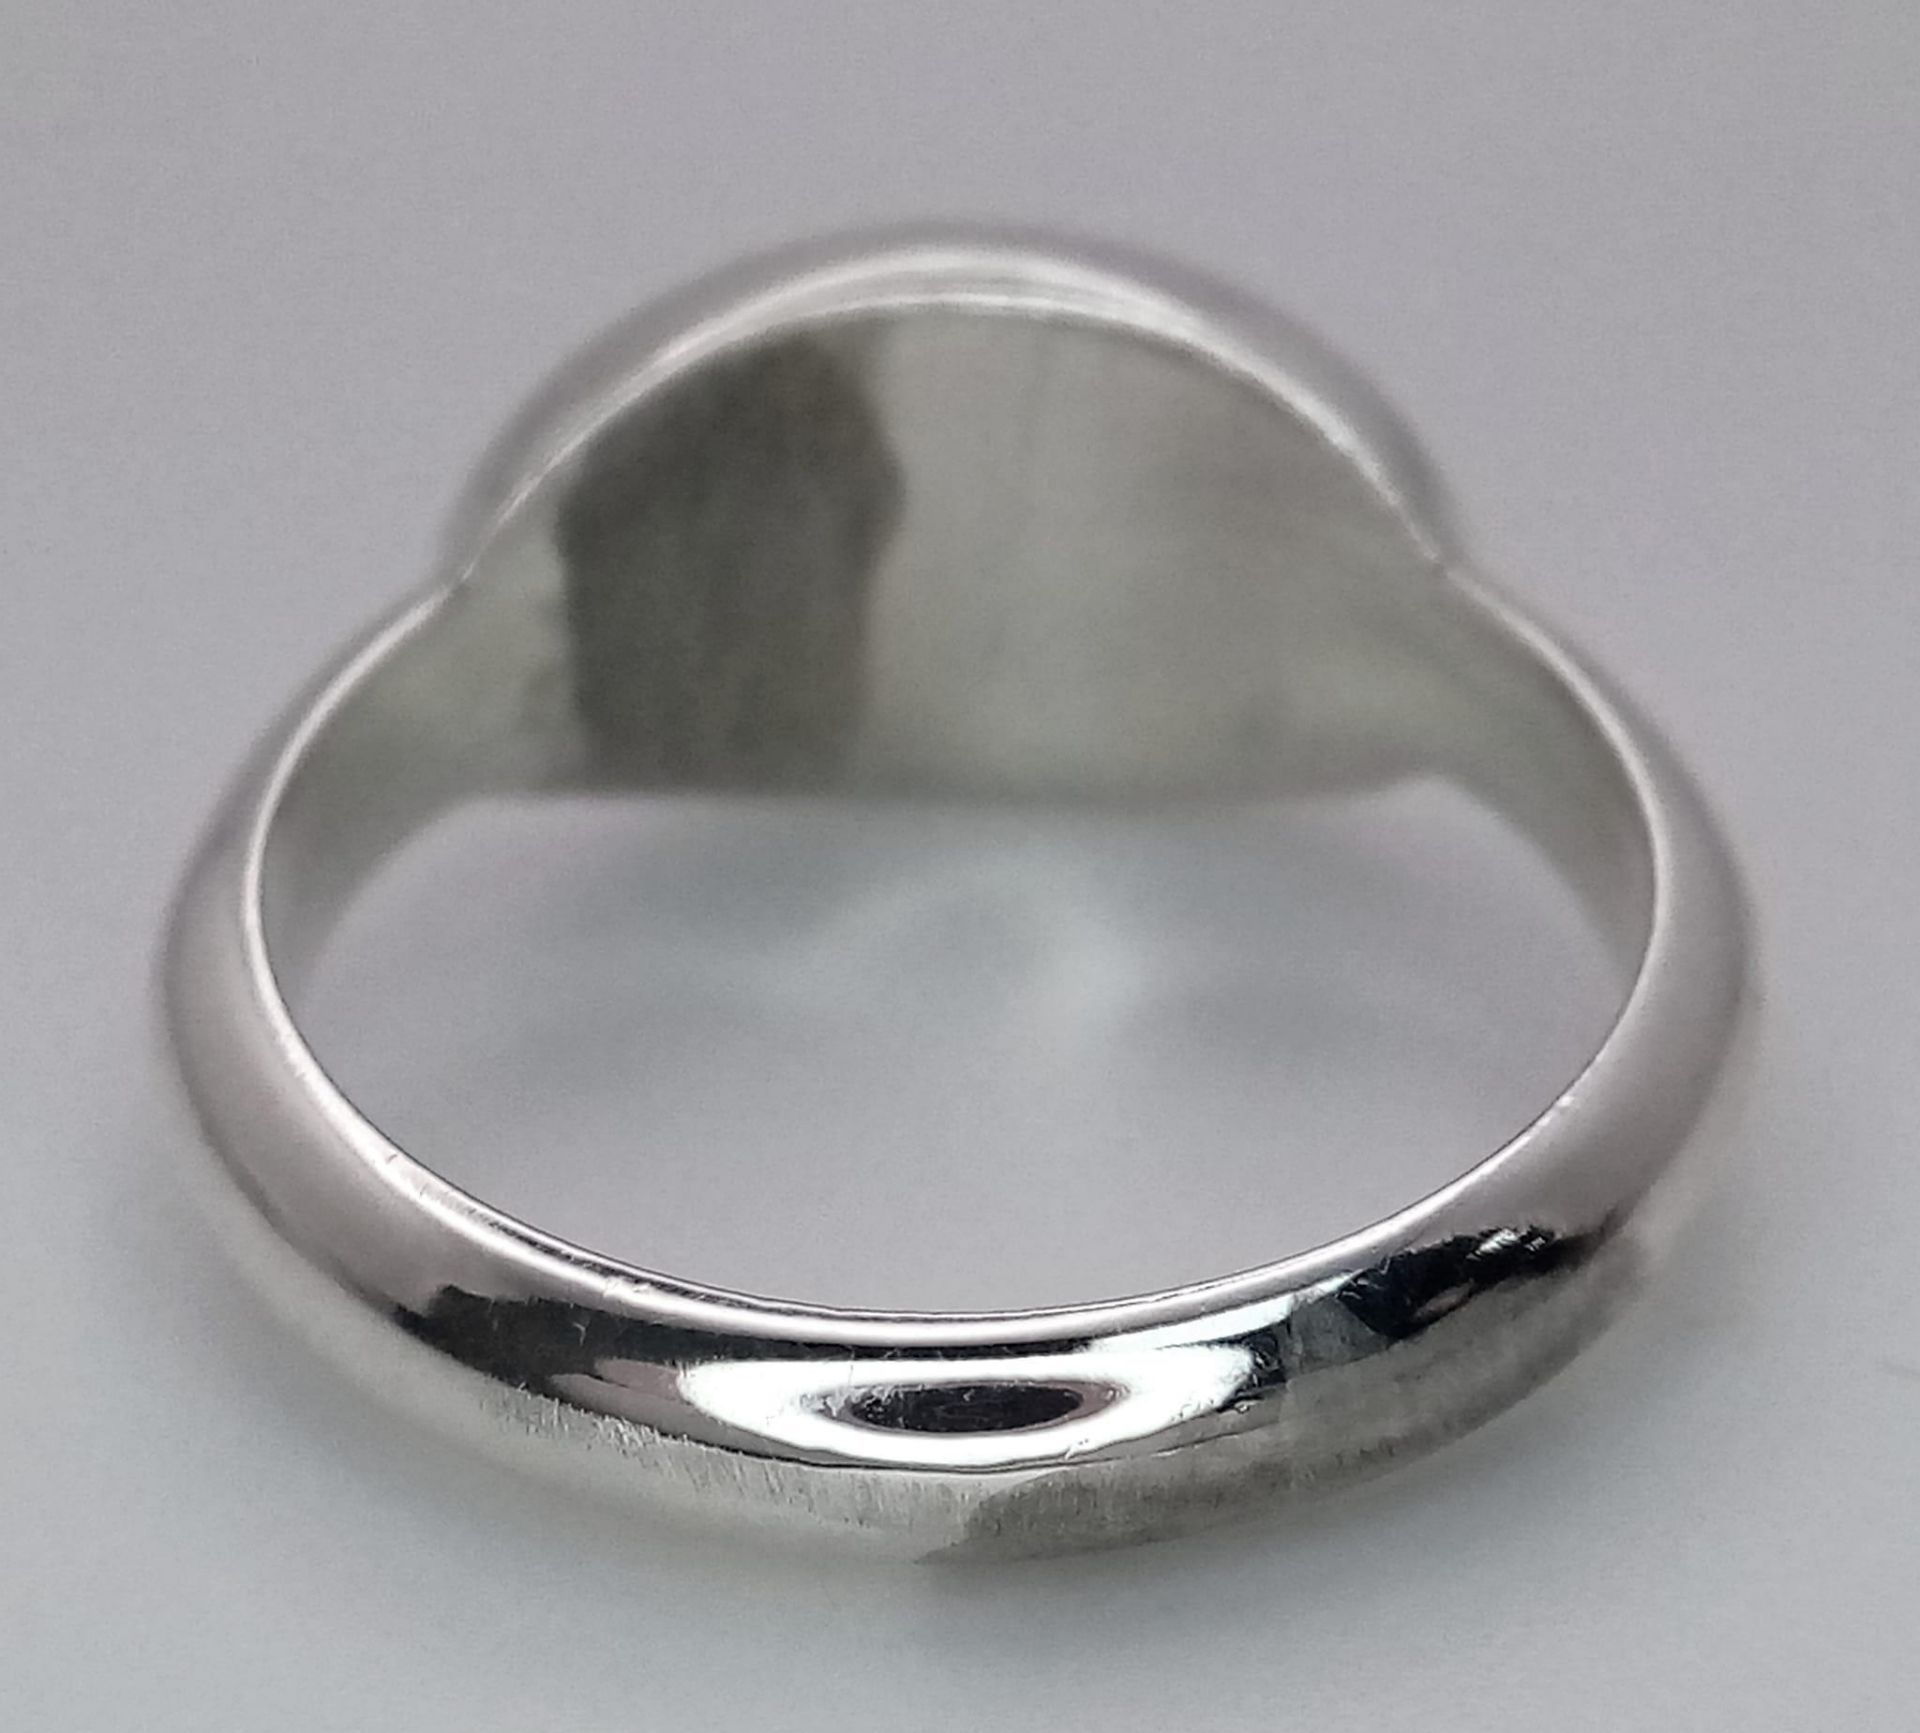 A Please Return to Tiffany & Co. Silver Signet Ring. Comes with a Tiffany pouch. Size O. Ref: 016081 - Bild 3 aus 4